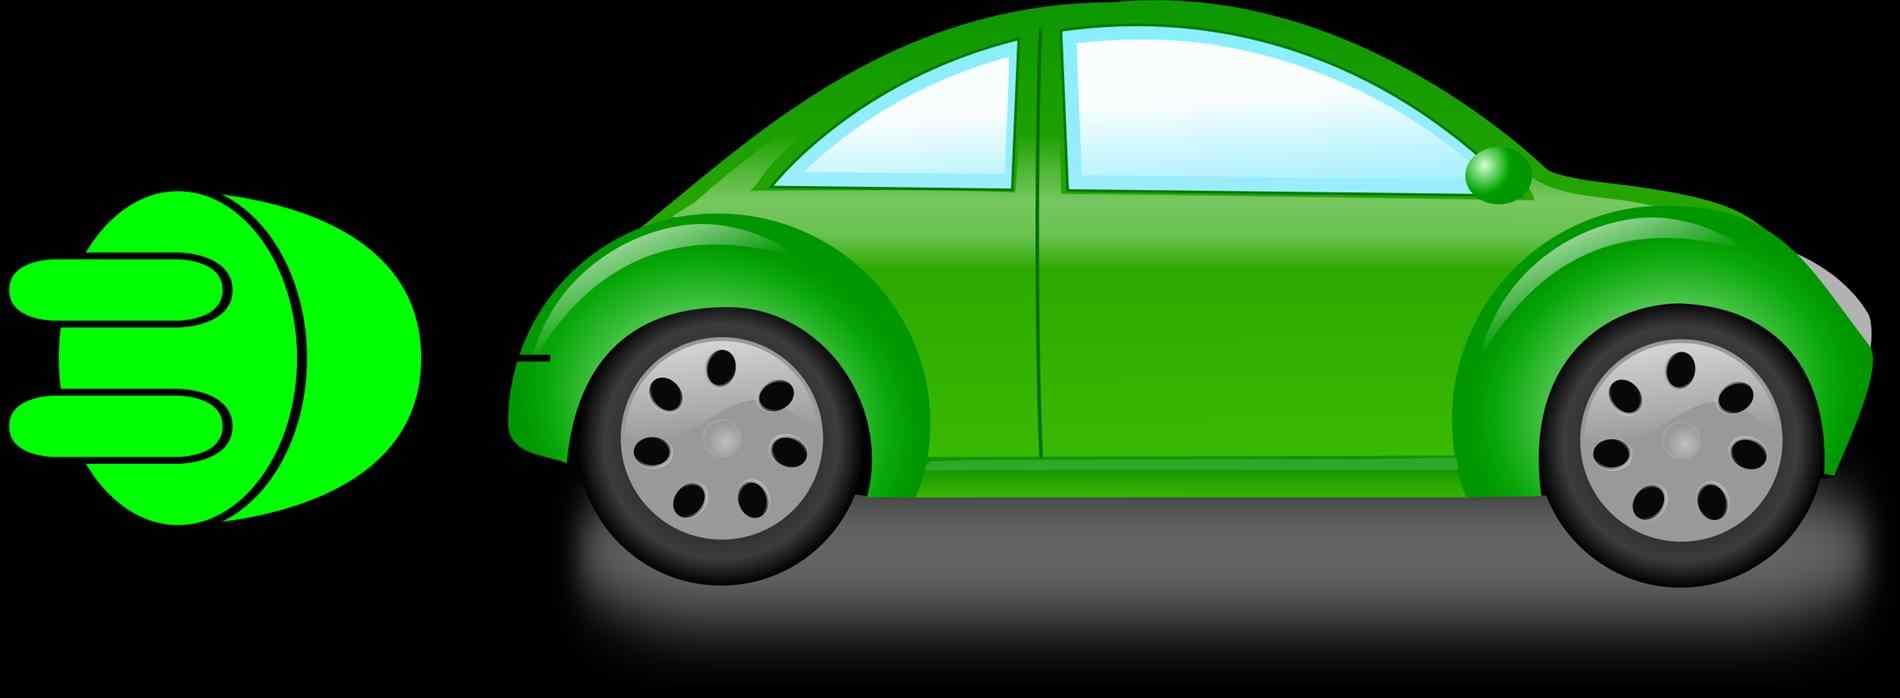 Locking In Lower Auto Insurance Rates By Buying A “Green” Car